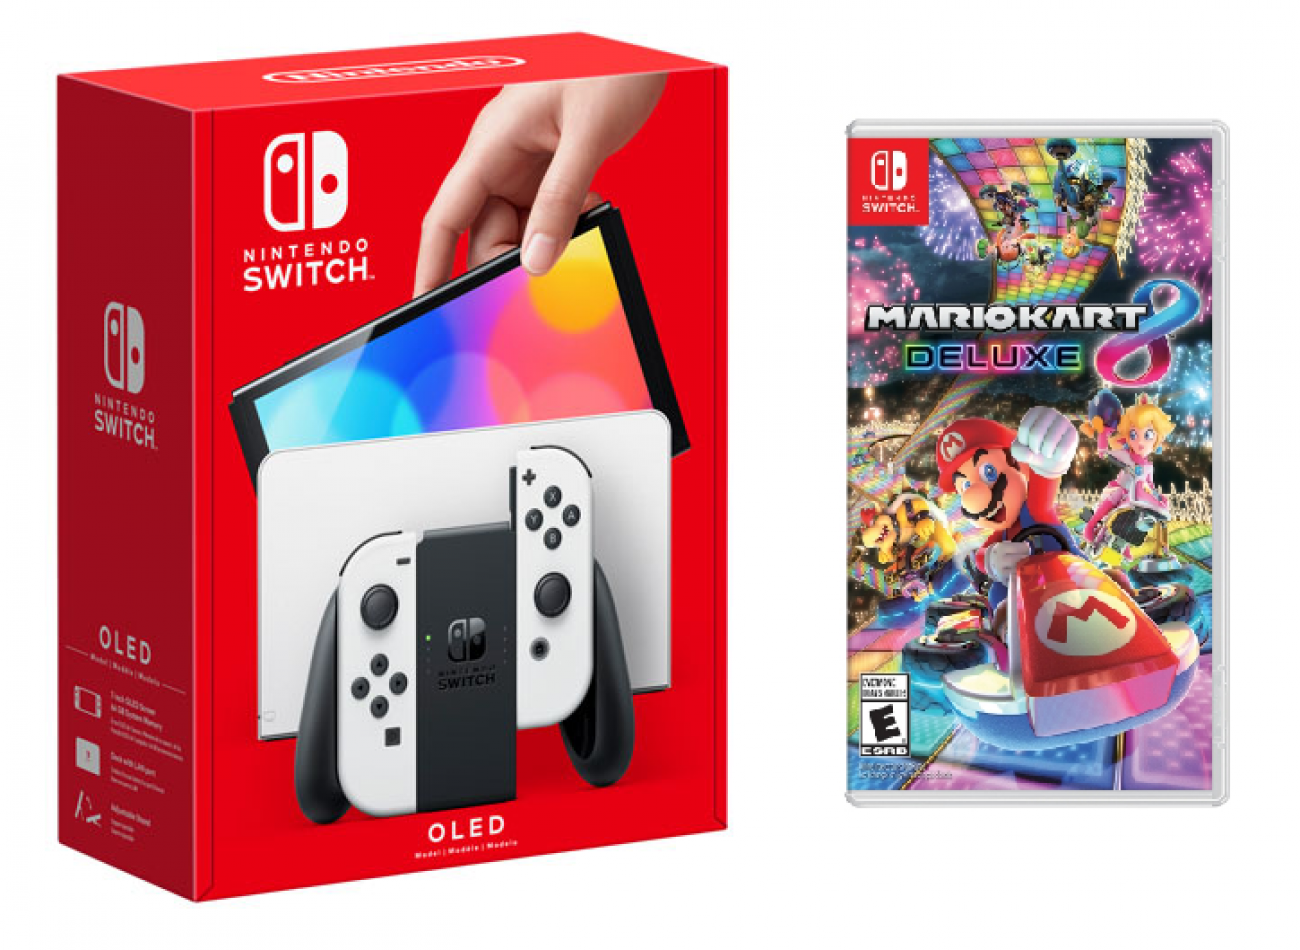 Nintendo Switch Console - White with Mario Kart 8 Deluxe